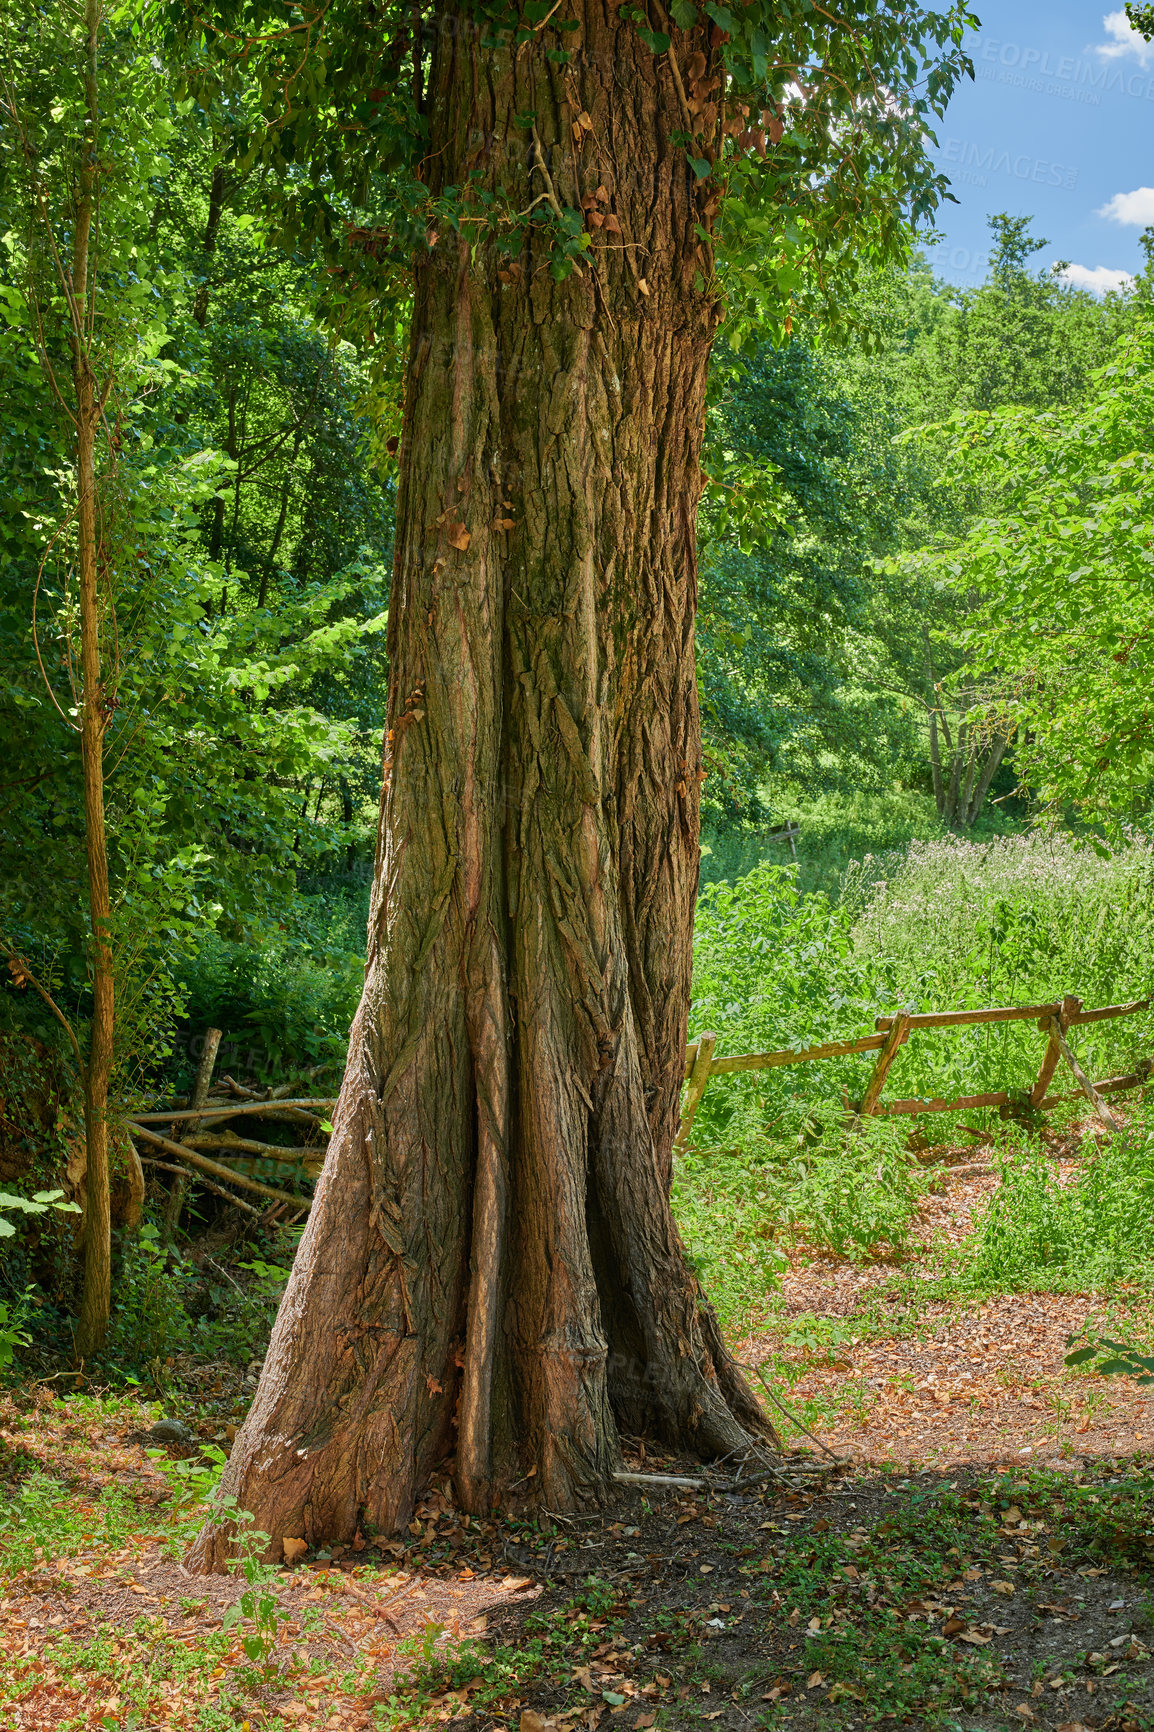 Buy stock photo Big old tree trunk in a forest. Remote woodland in spring with green grass, plants, and bushes growing in between trees. Discovery deep in the empty woods in a wild and vibrant nature environment